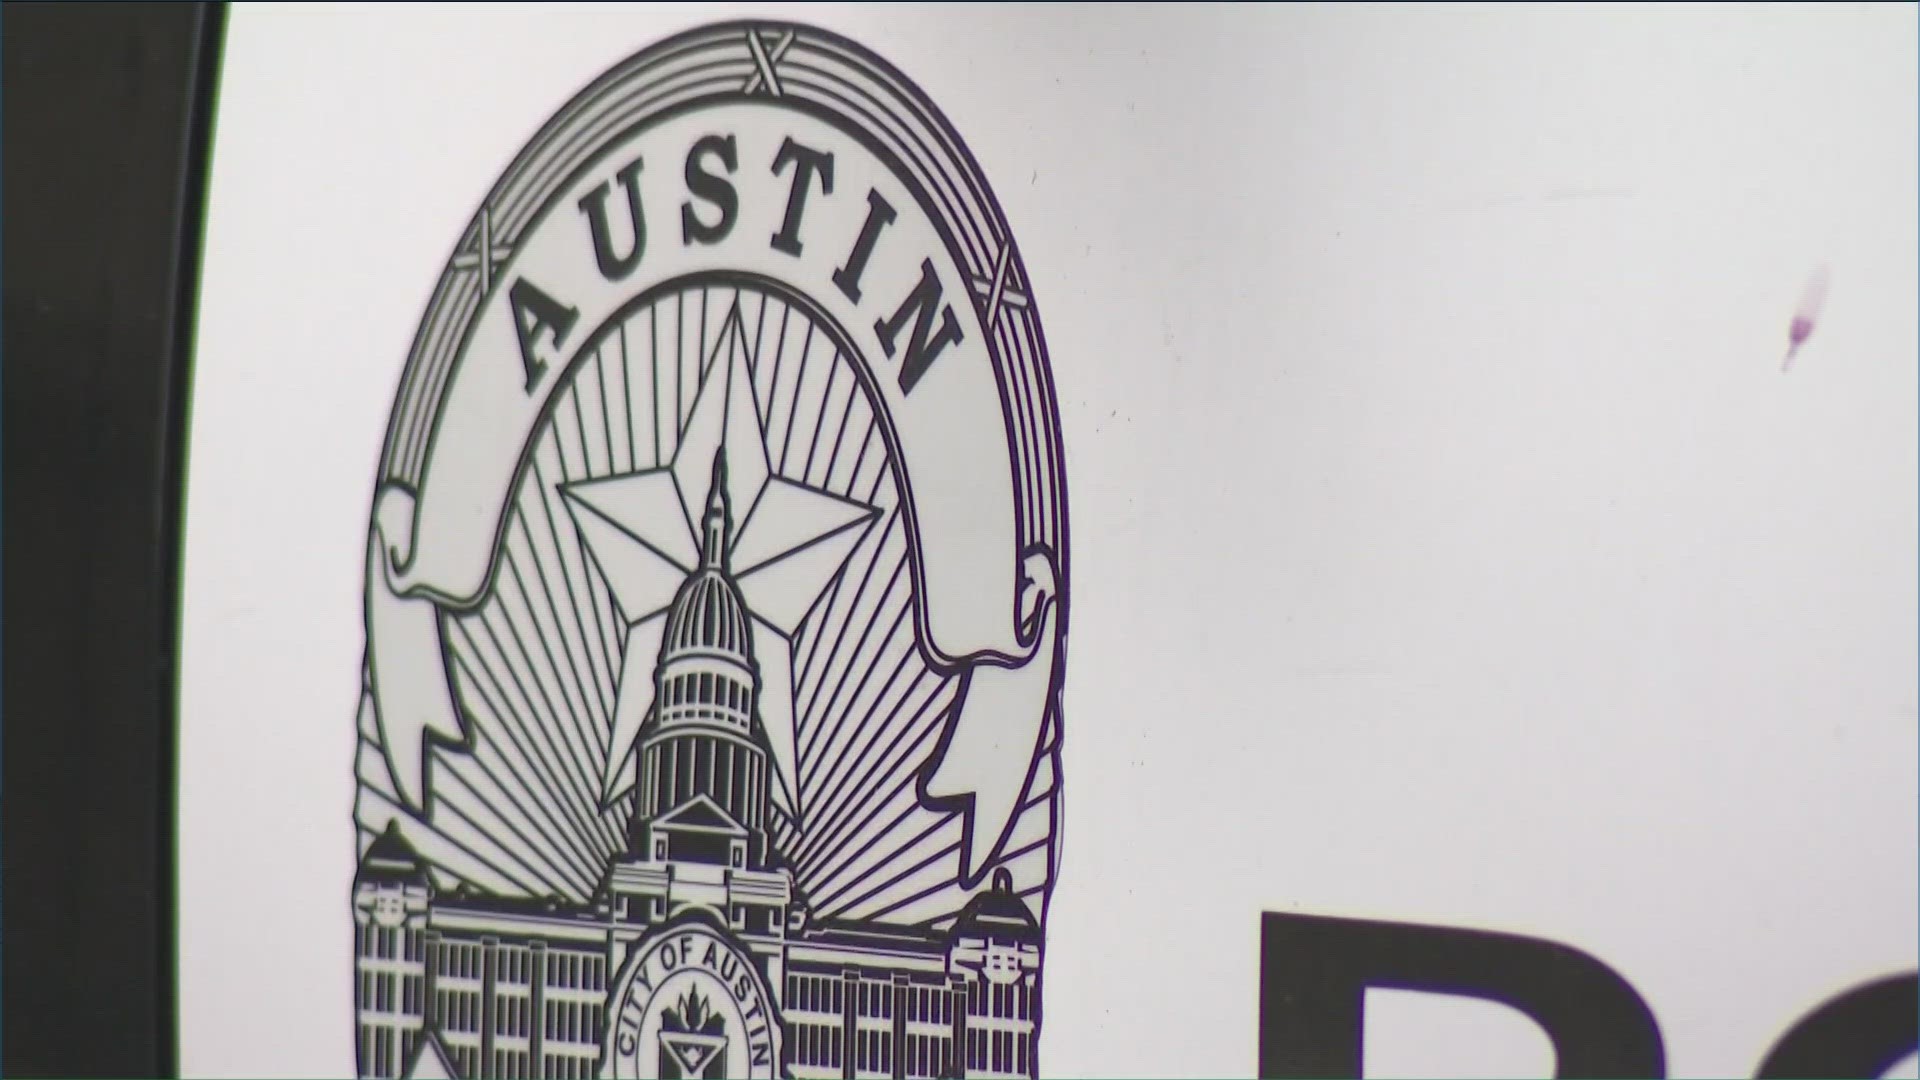 On April 22, the Austin Police Department, Fire Department and other city agencies will shift to an Advanced Encryption Standard, AES.